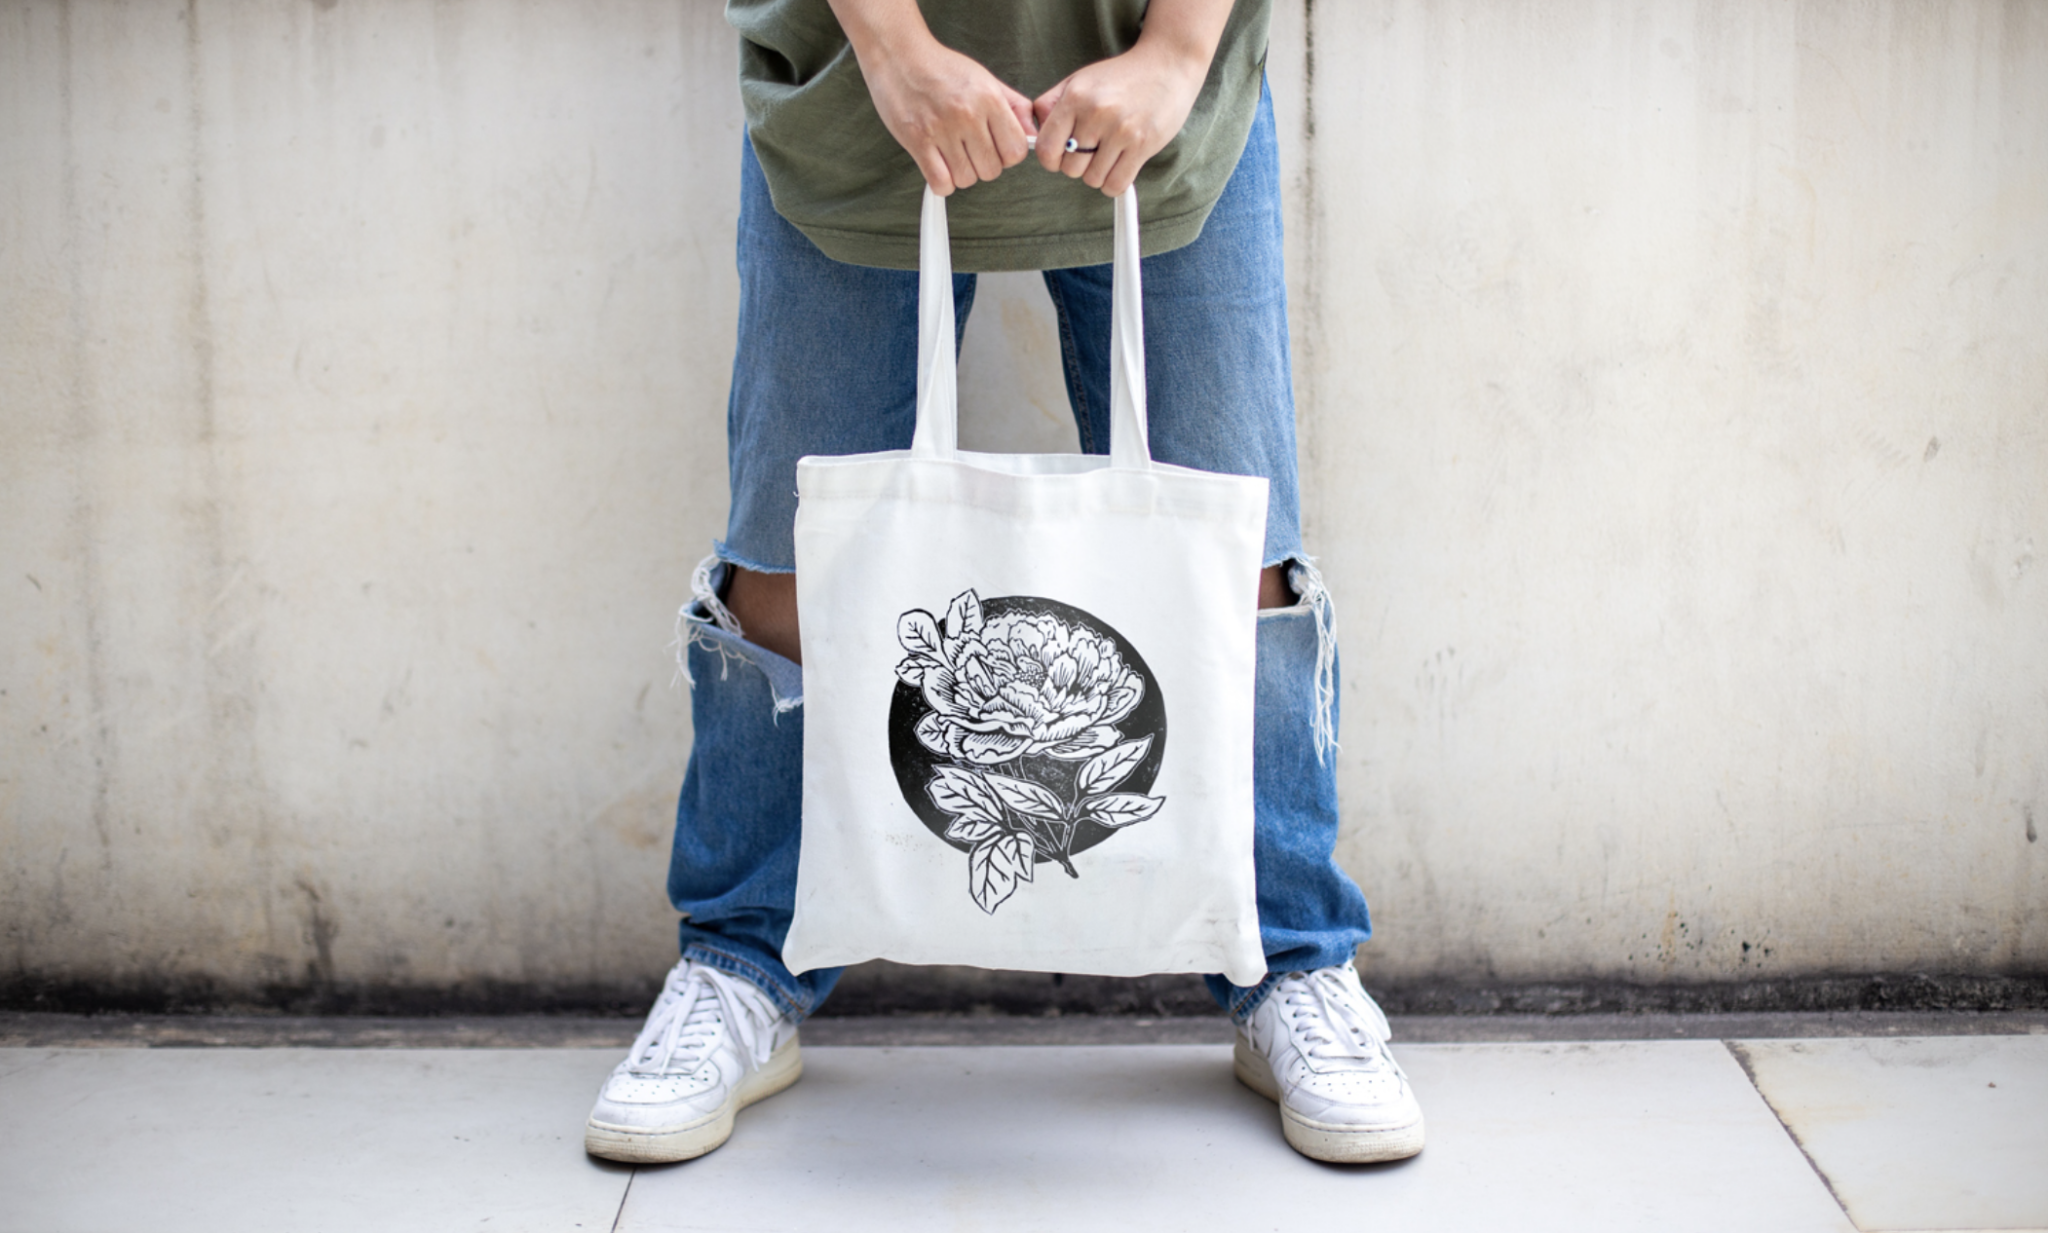 Person wearing ripped blue jeans and white sneakers holding a white canvas tote bag featuring a black floral design. The background is a plain, textured off-white wall, and the focus is on the tote bag and the lower half of the person’s body.